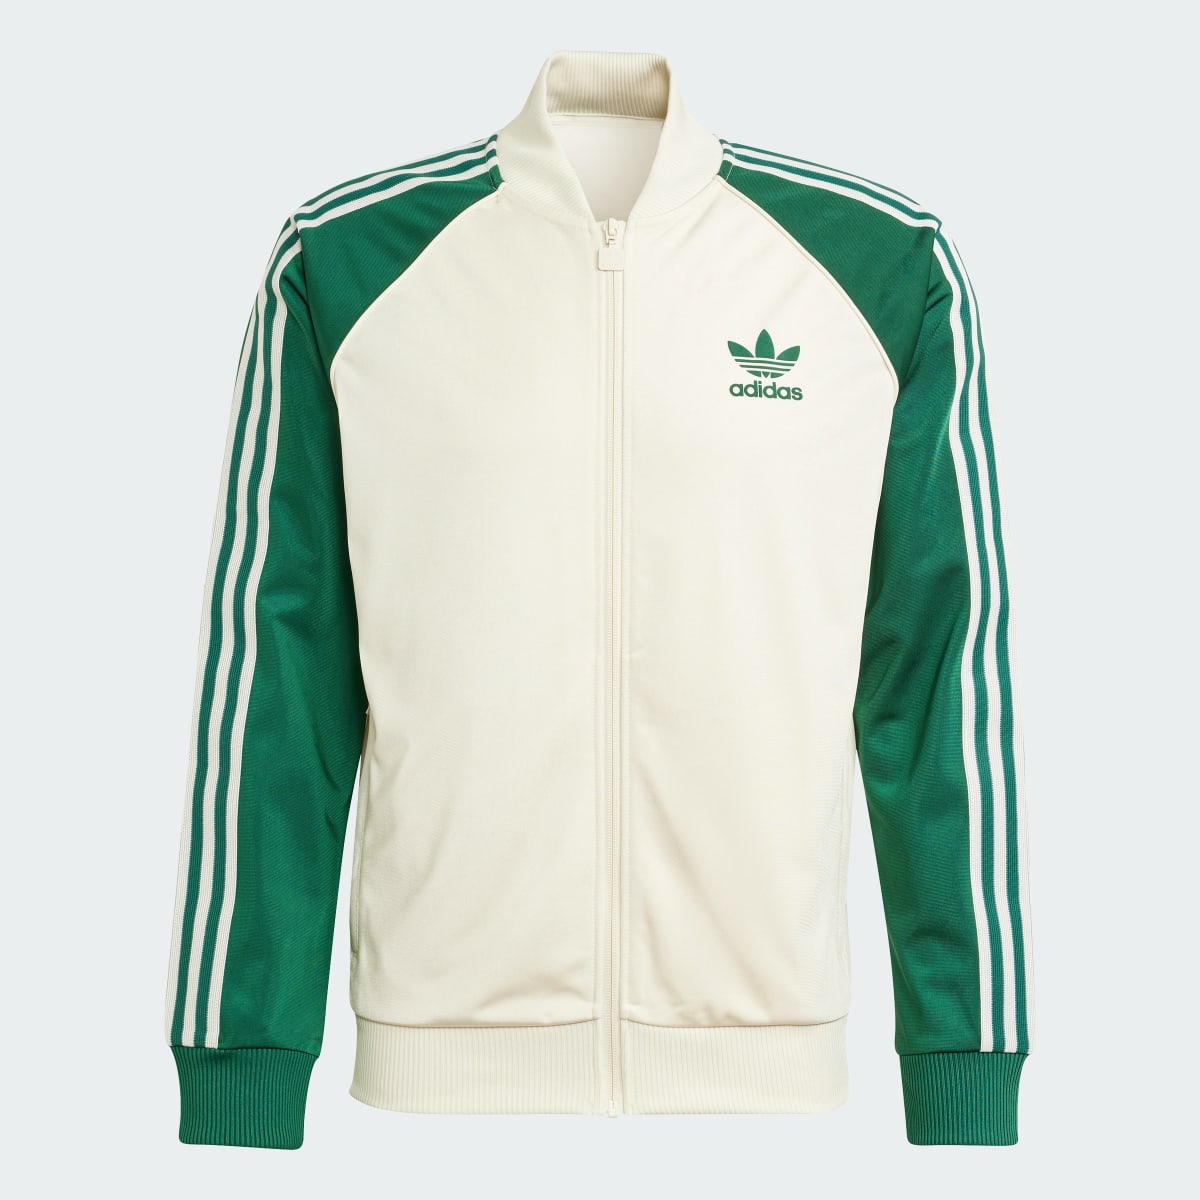 Adidas Track top SST. 5